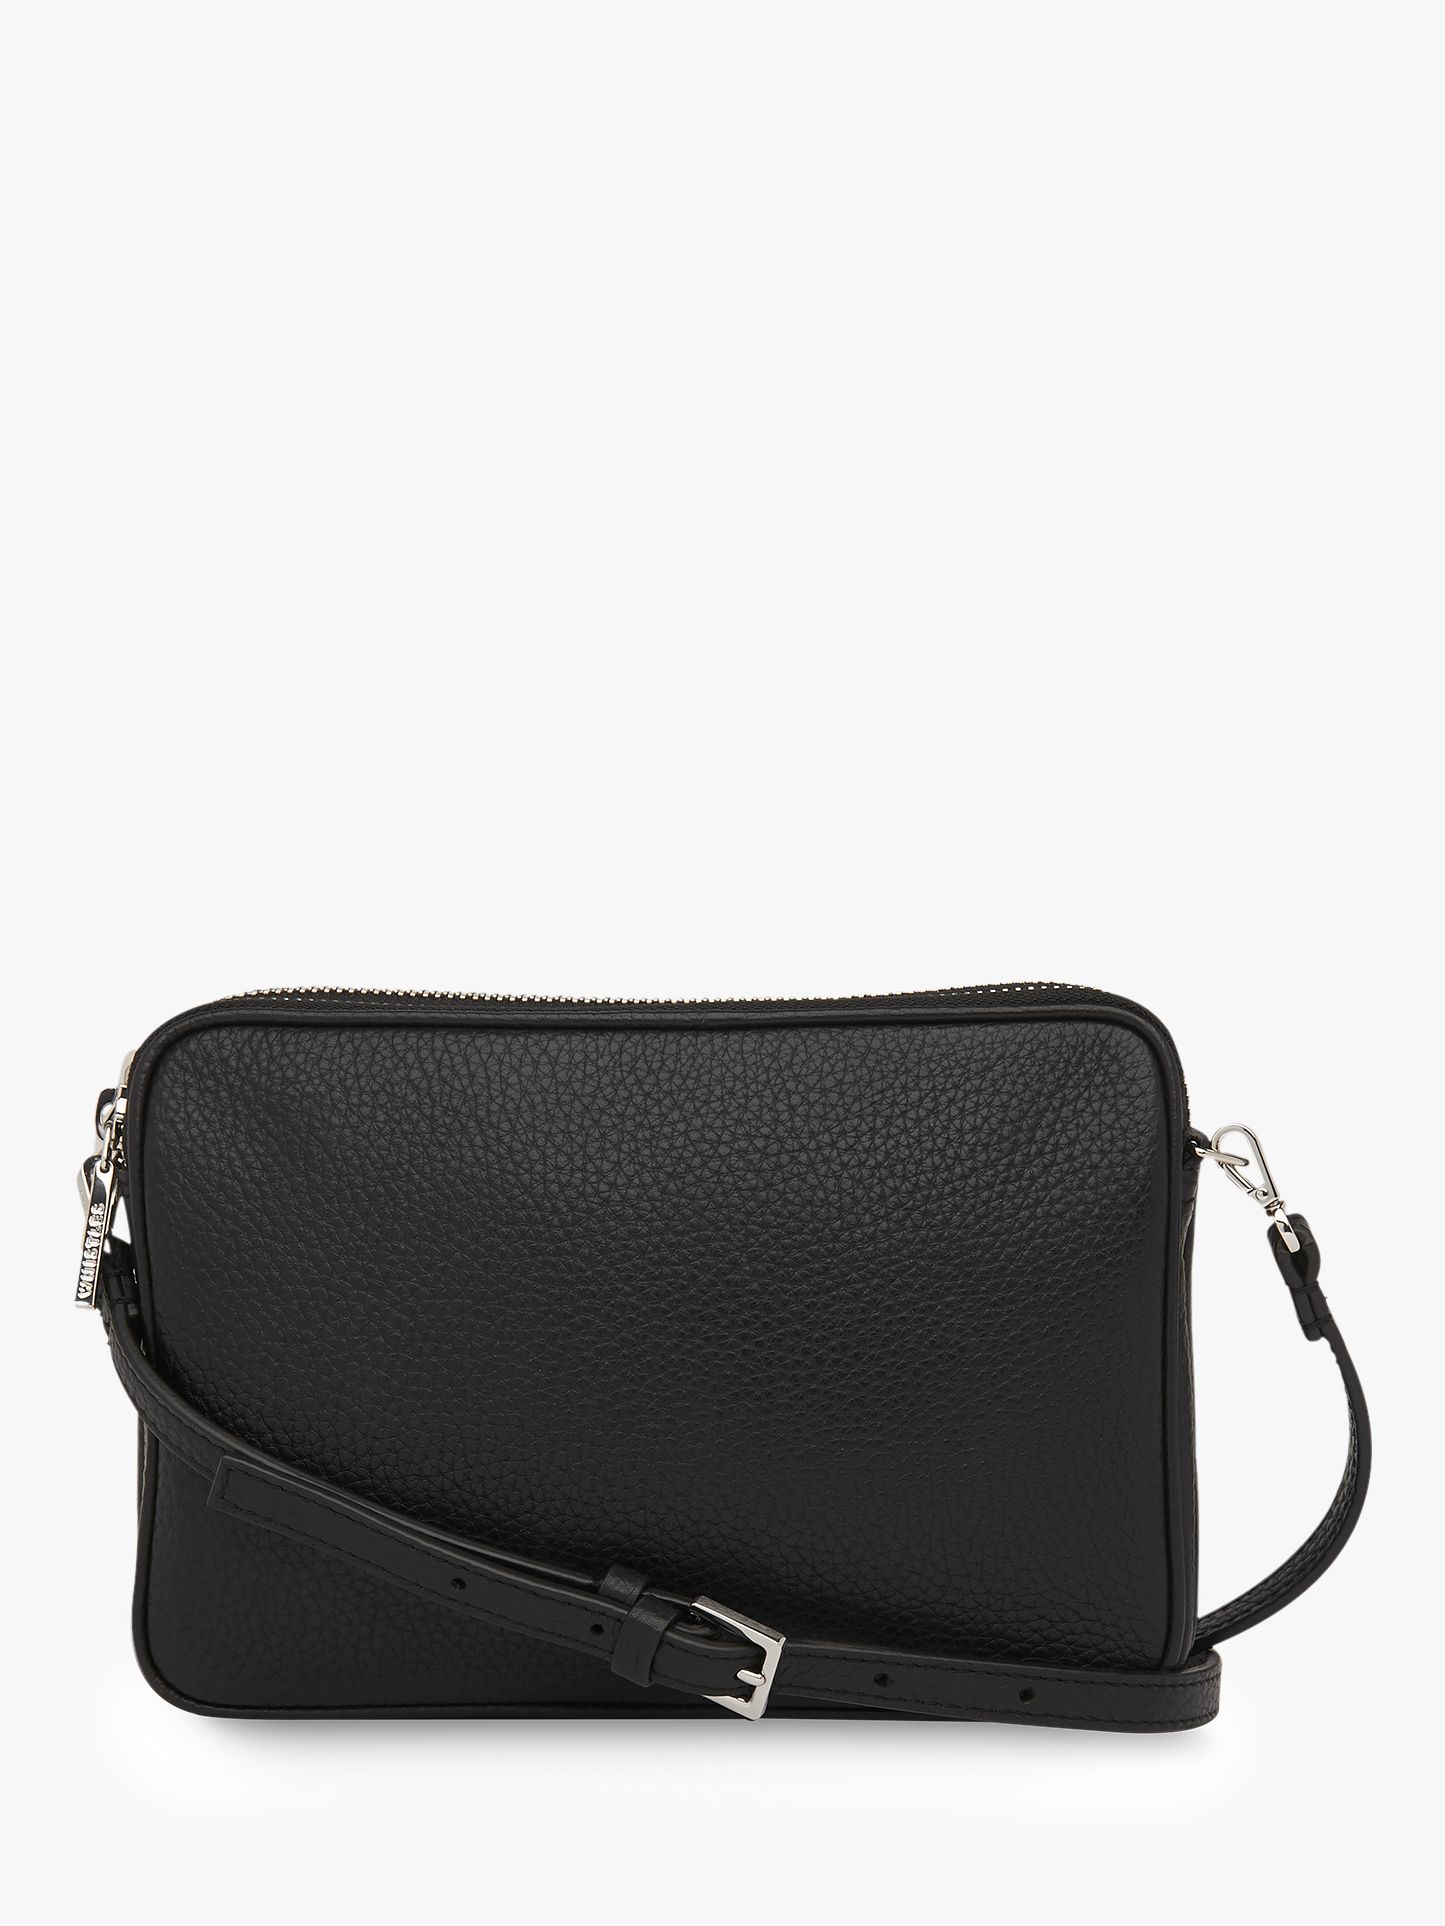 Whistles Cami Leather Cross Body Bag, Black at John Lewis & Partners